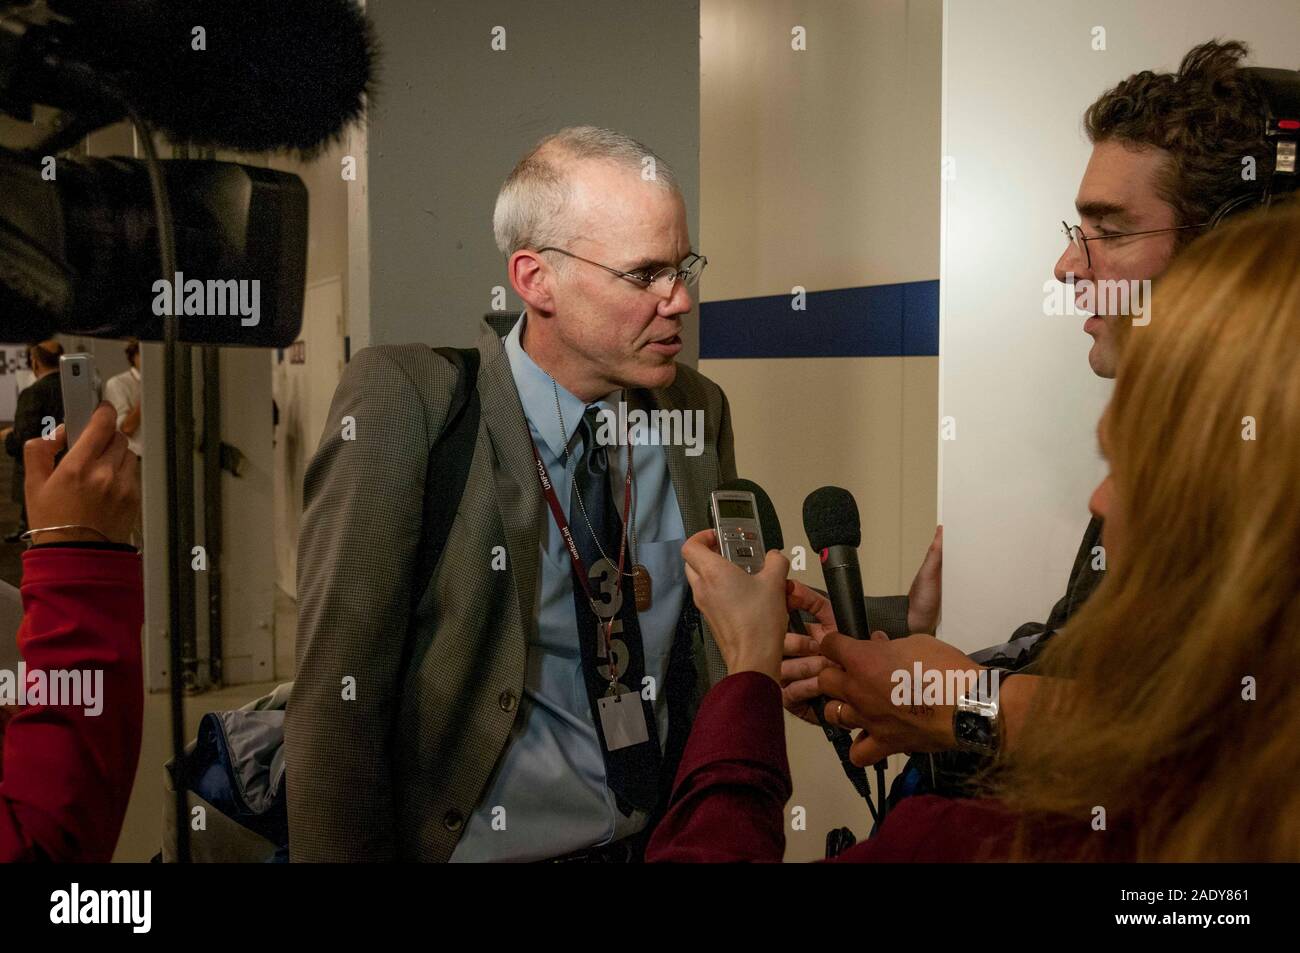 Author and environmentalist Bill McKibben is interviewed by journalists in the Bella Center, Copenhagen, Denmark during COP 15 climate conference. Stock Photo